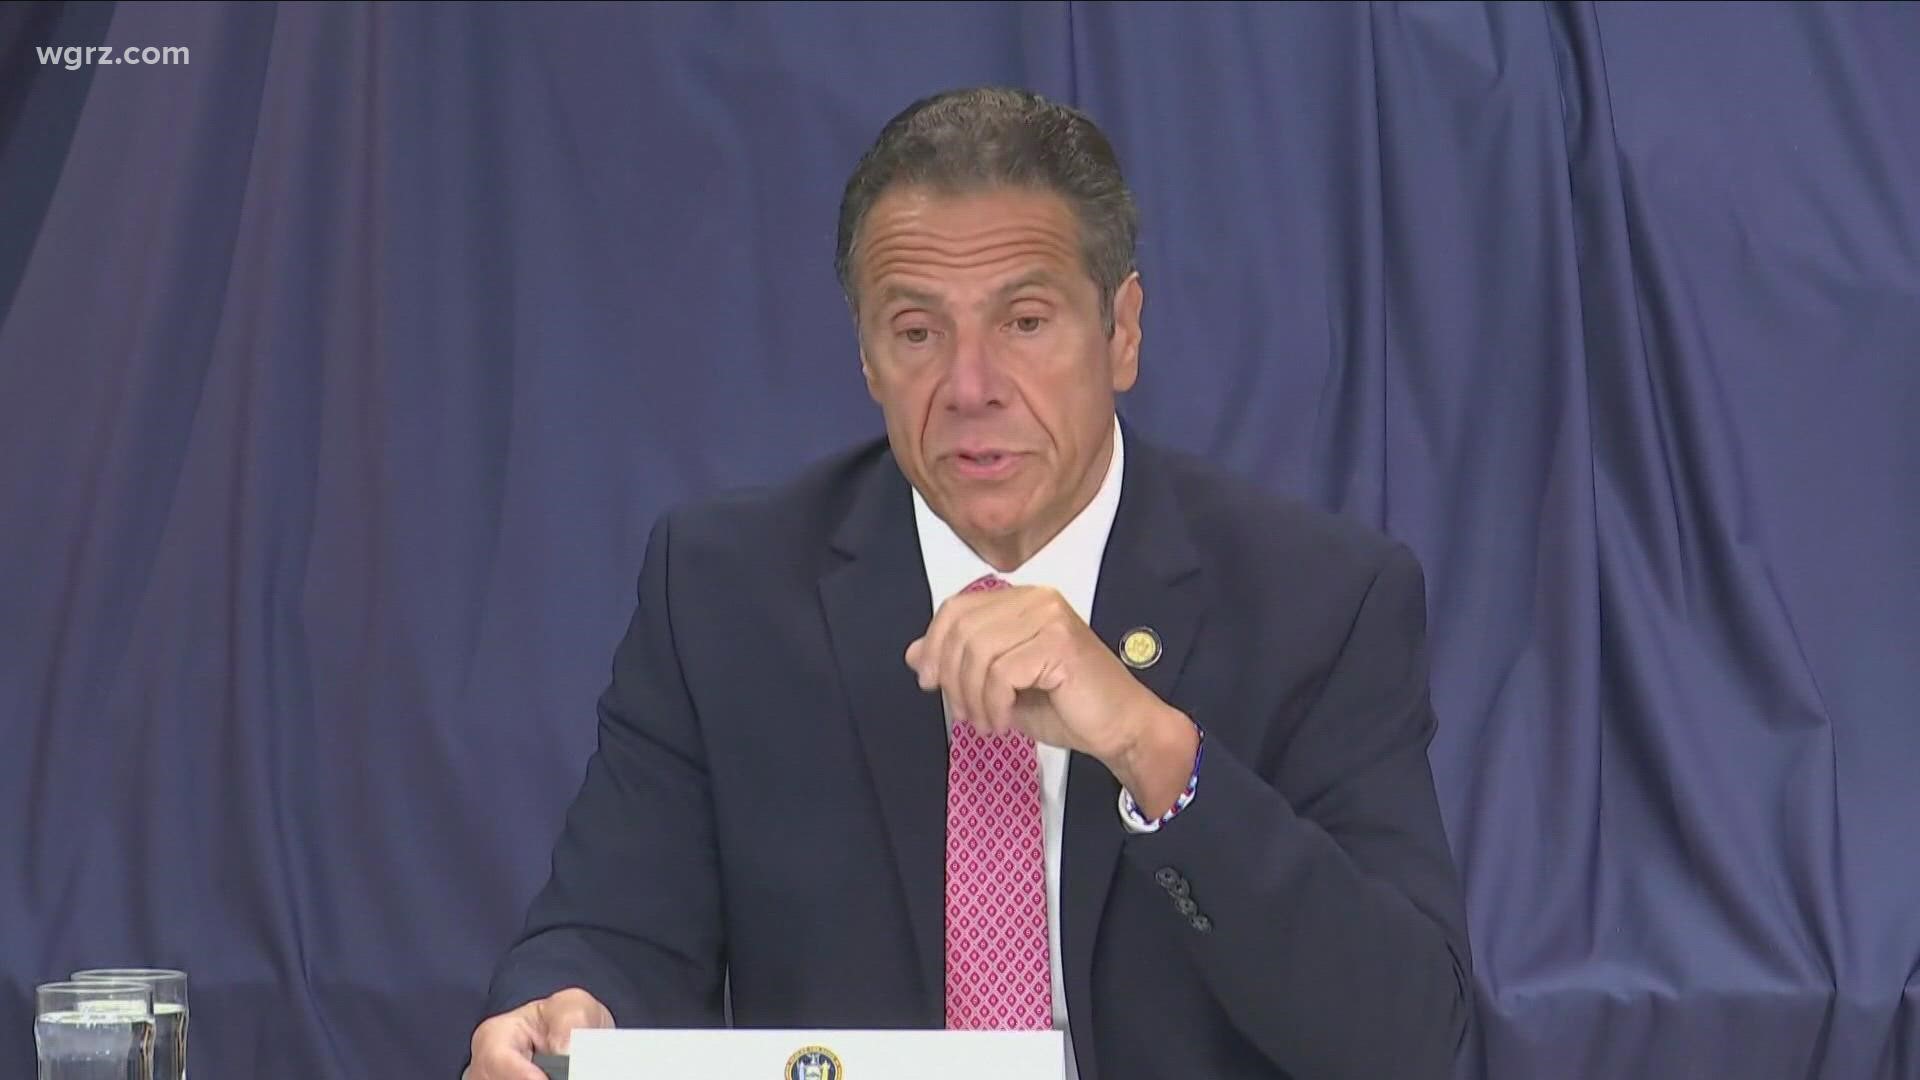 New York state's ethics board says former Governor Cuomo is going to have to give back more than $5 million he got from his book deal.